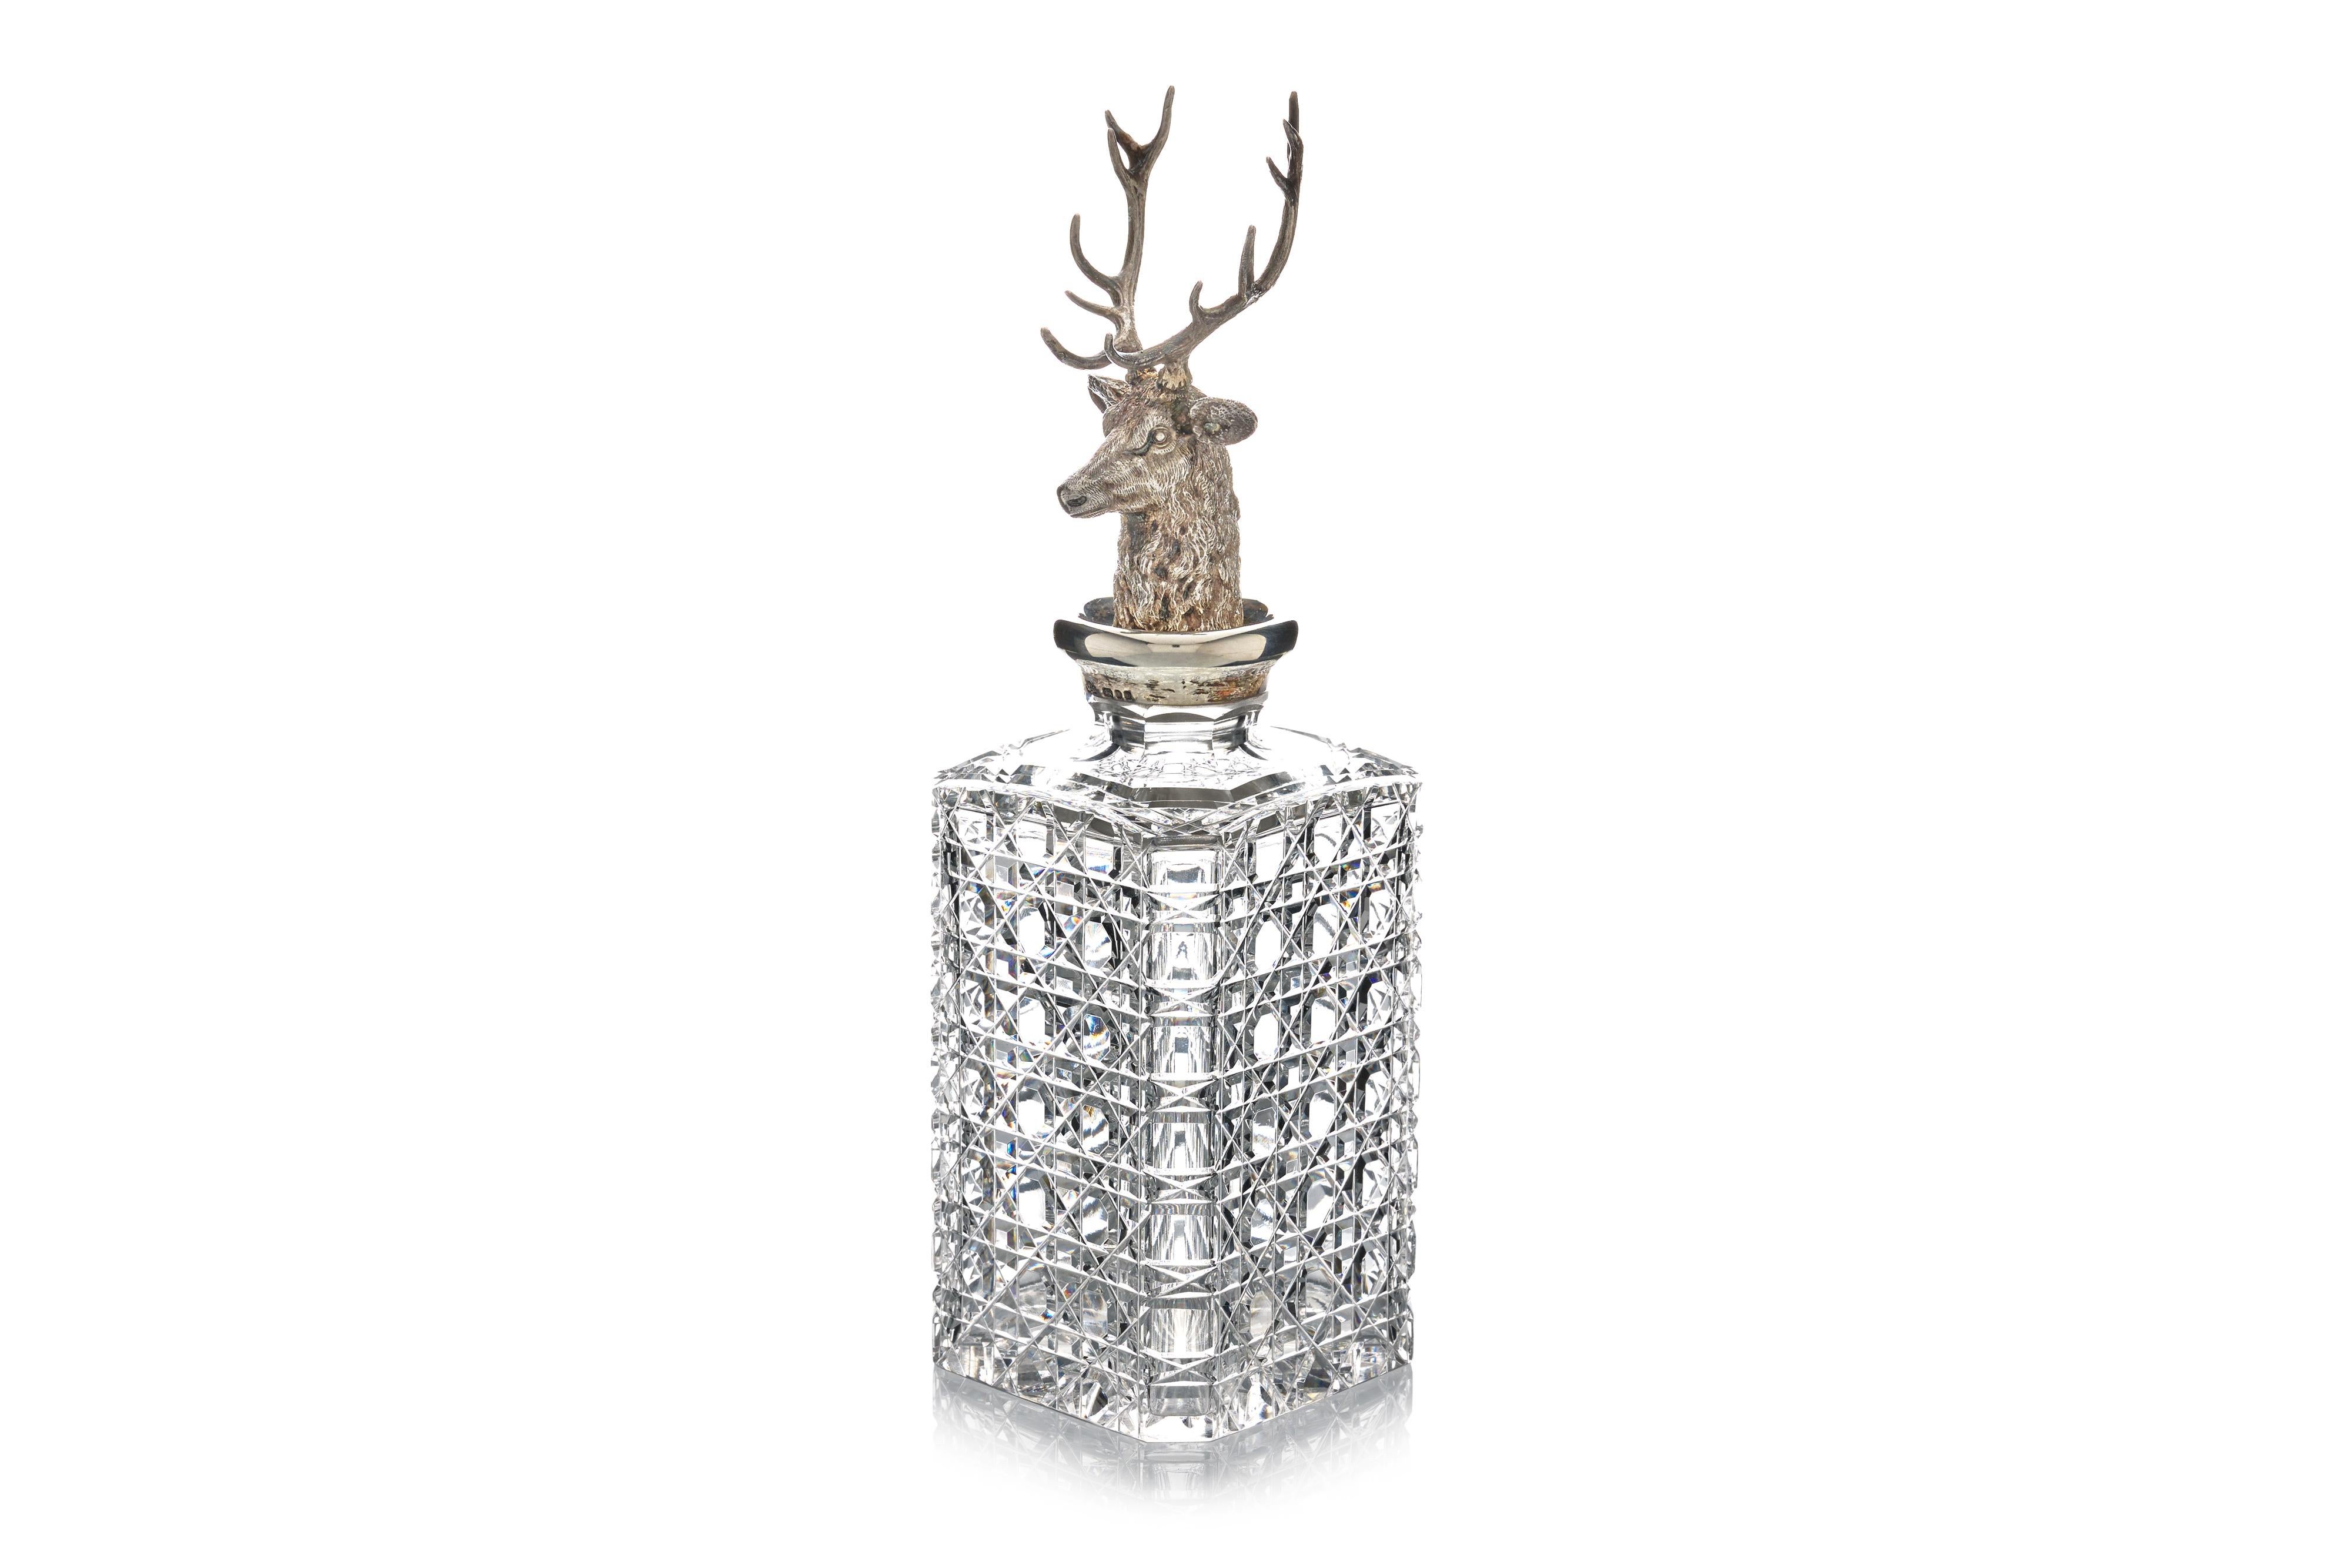 A gorgeous Asprey crystal decanter with a heavy sterling silver stopper and collar.

Brilliantly cut crystal and impeccable details on the stopper make this item a major standout!

1970s

Measures: 12